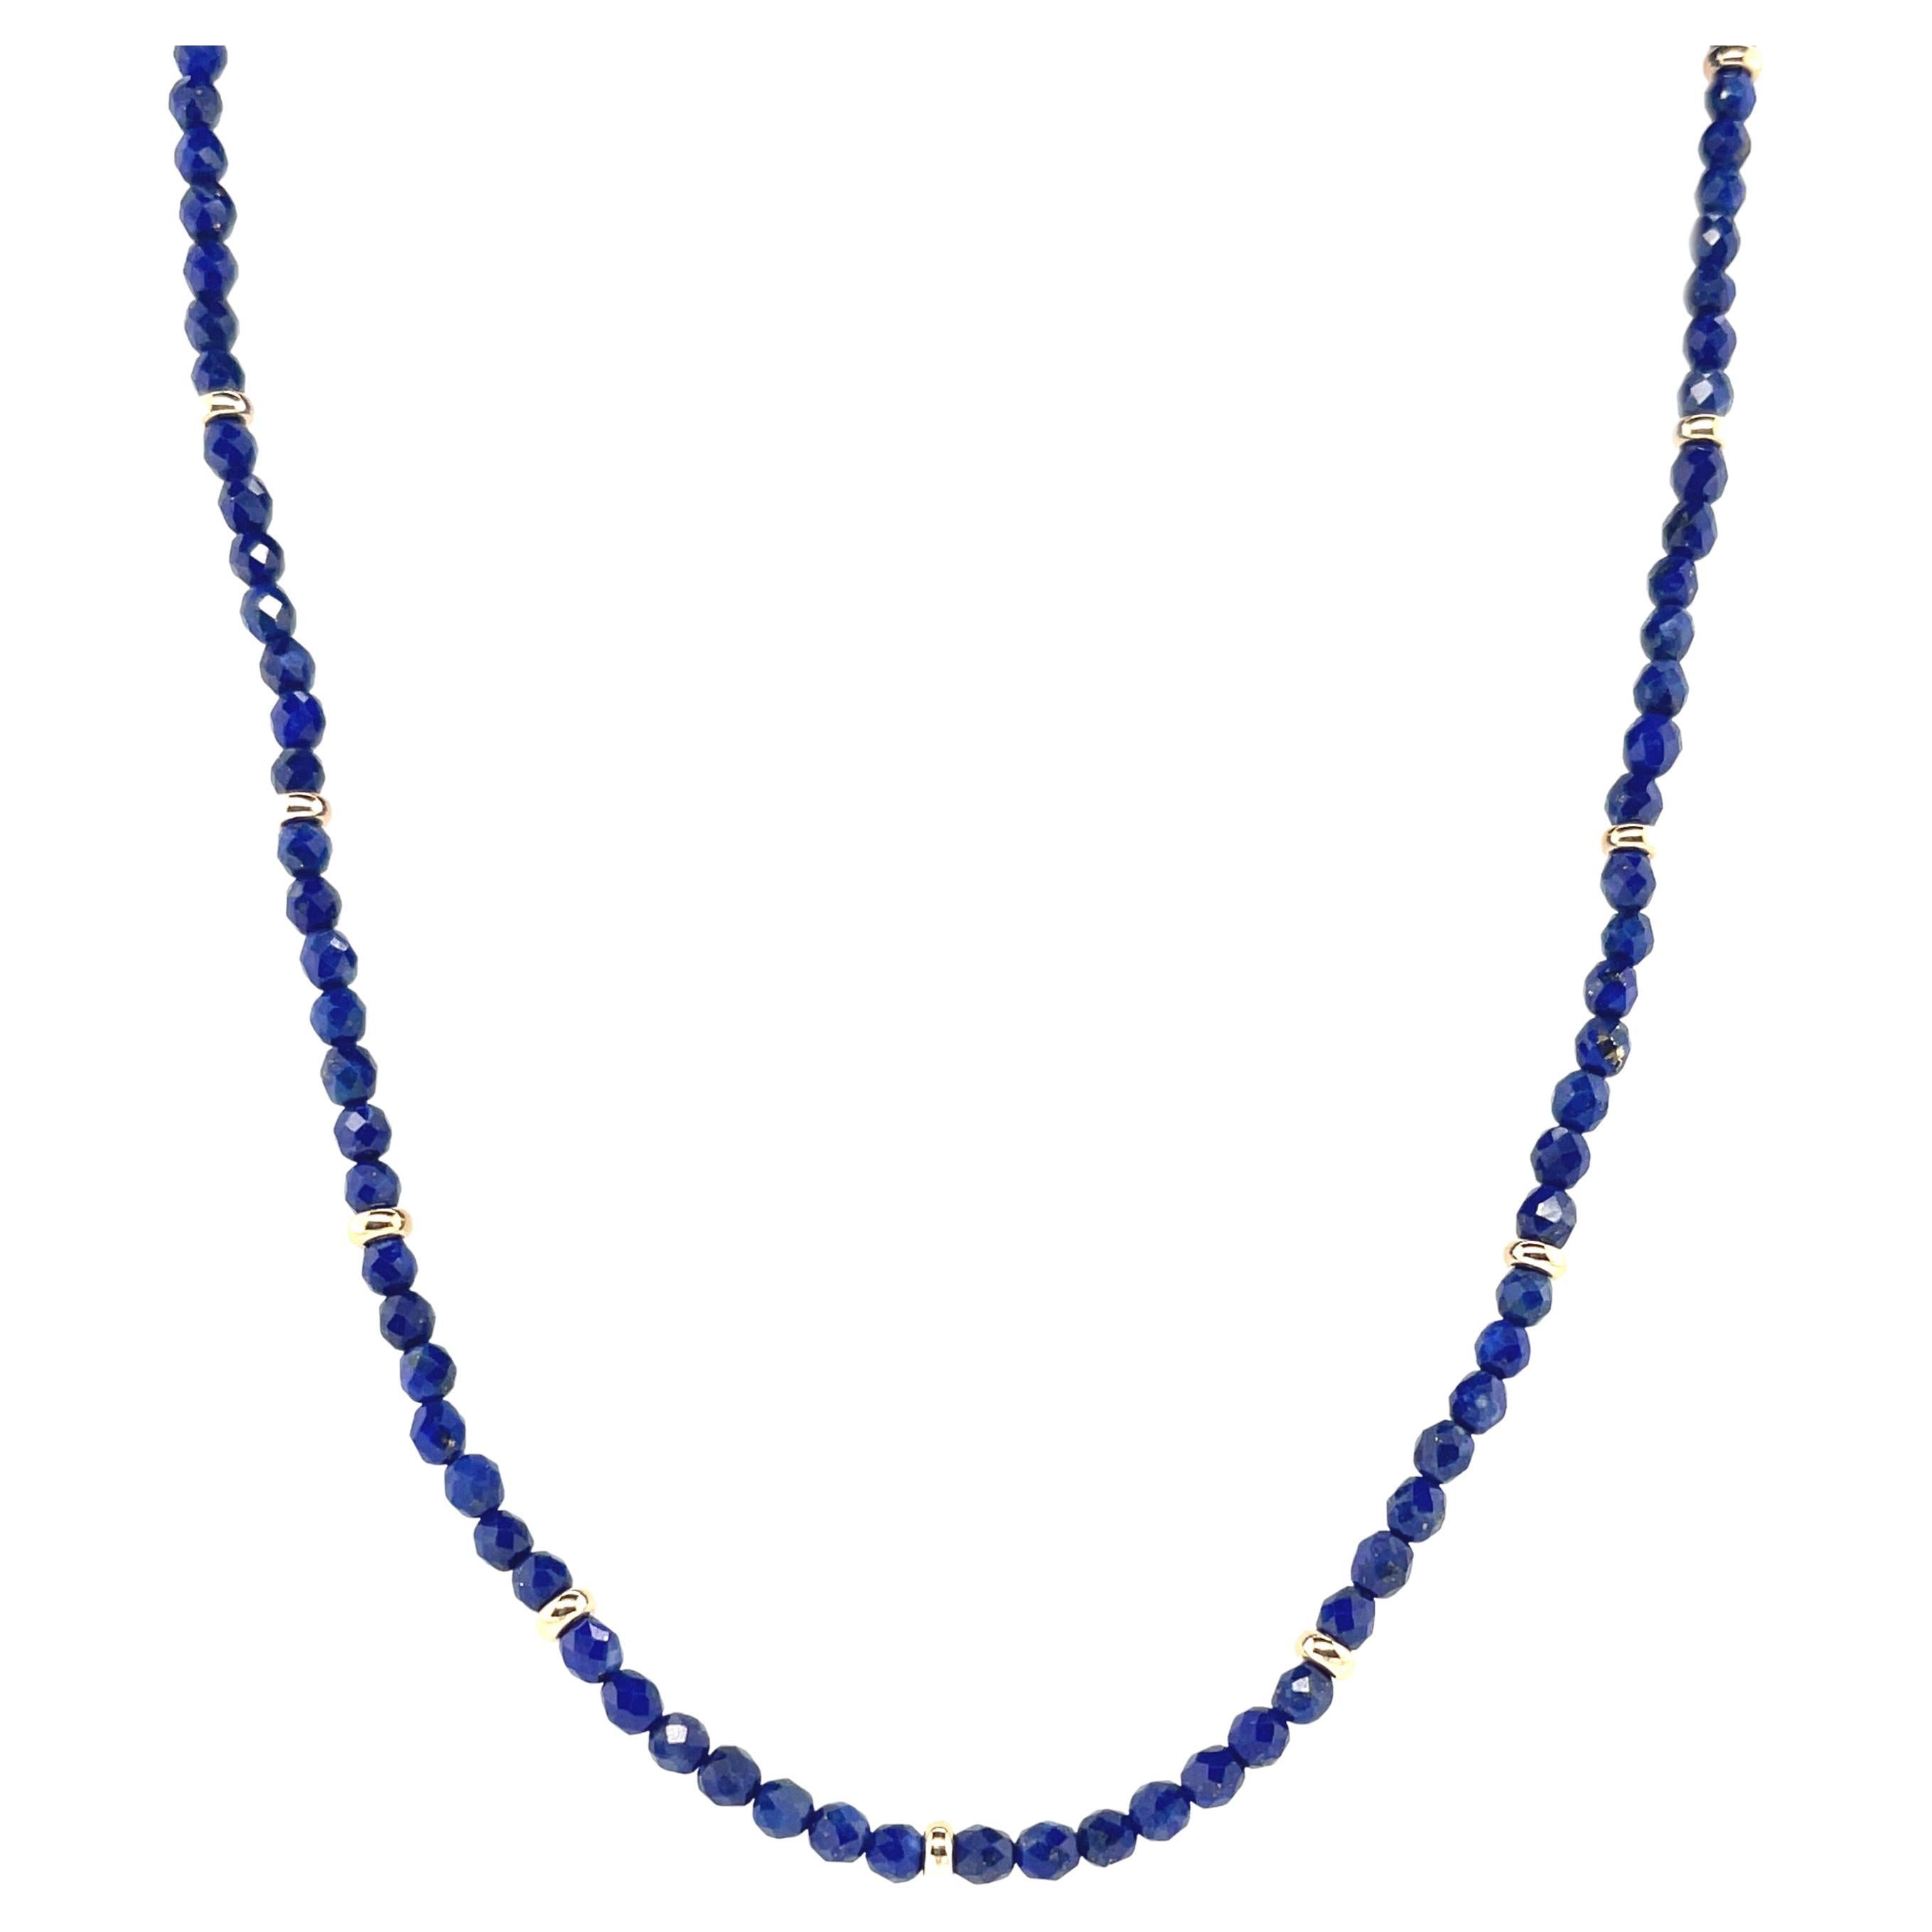 Bring color and elegance to any outfit with this strand of beautifully faceted, sparkling lapis lazuli beads!  Featuring 3.00mm lapis beads with wonderfully rich, royal blue color, the facets on these gems catch the light beautifully and are